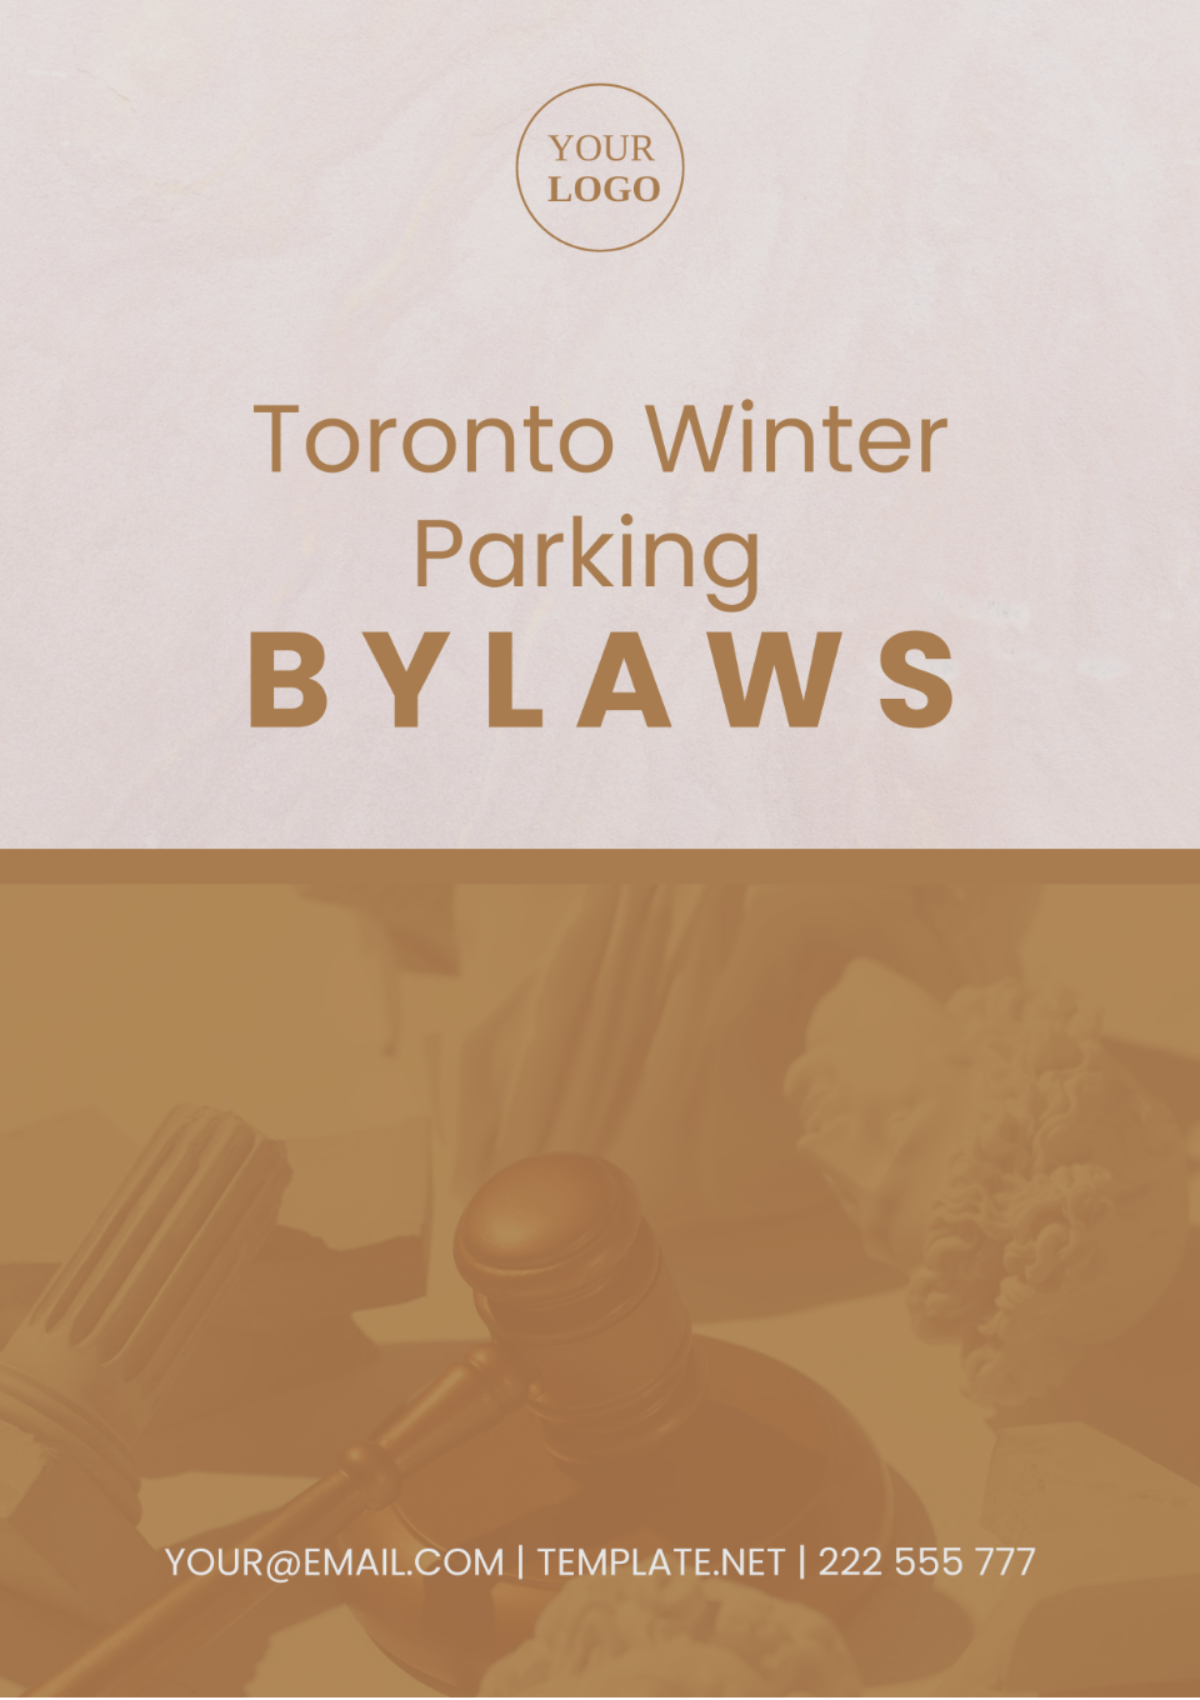 Toronto Winter Parking Bylaws Template